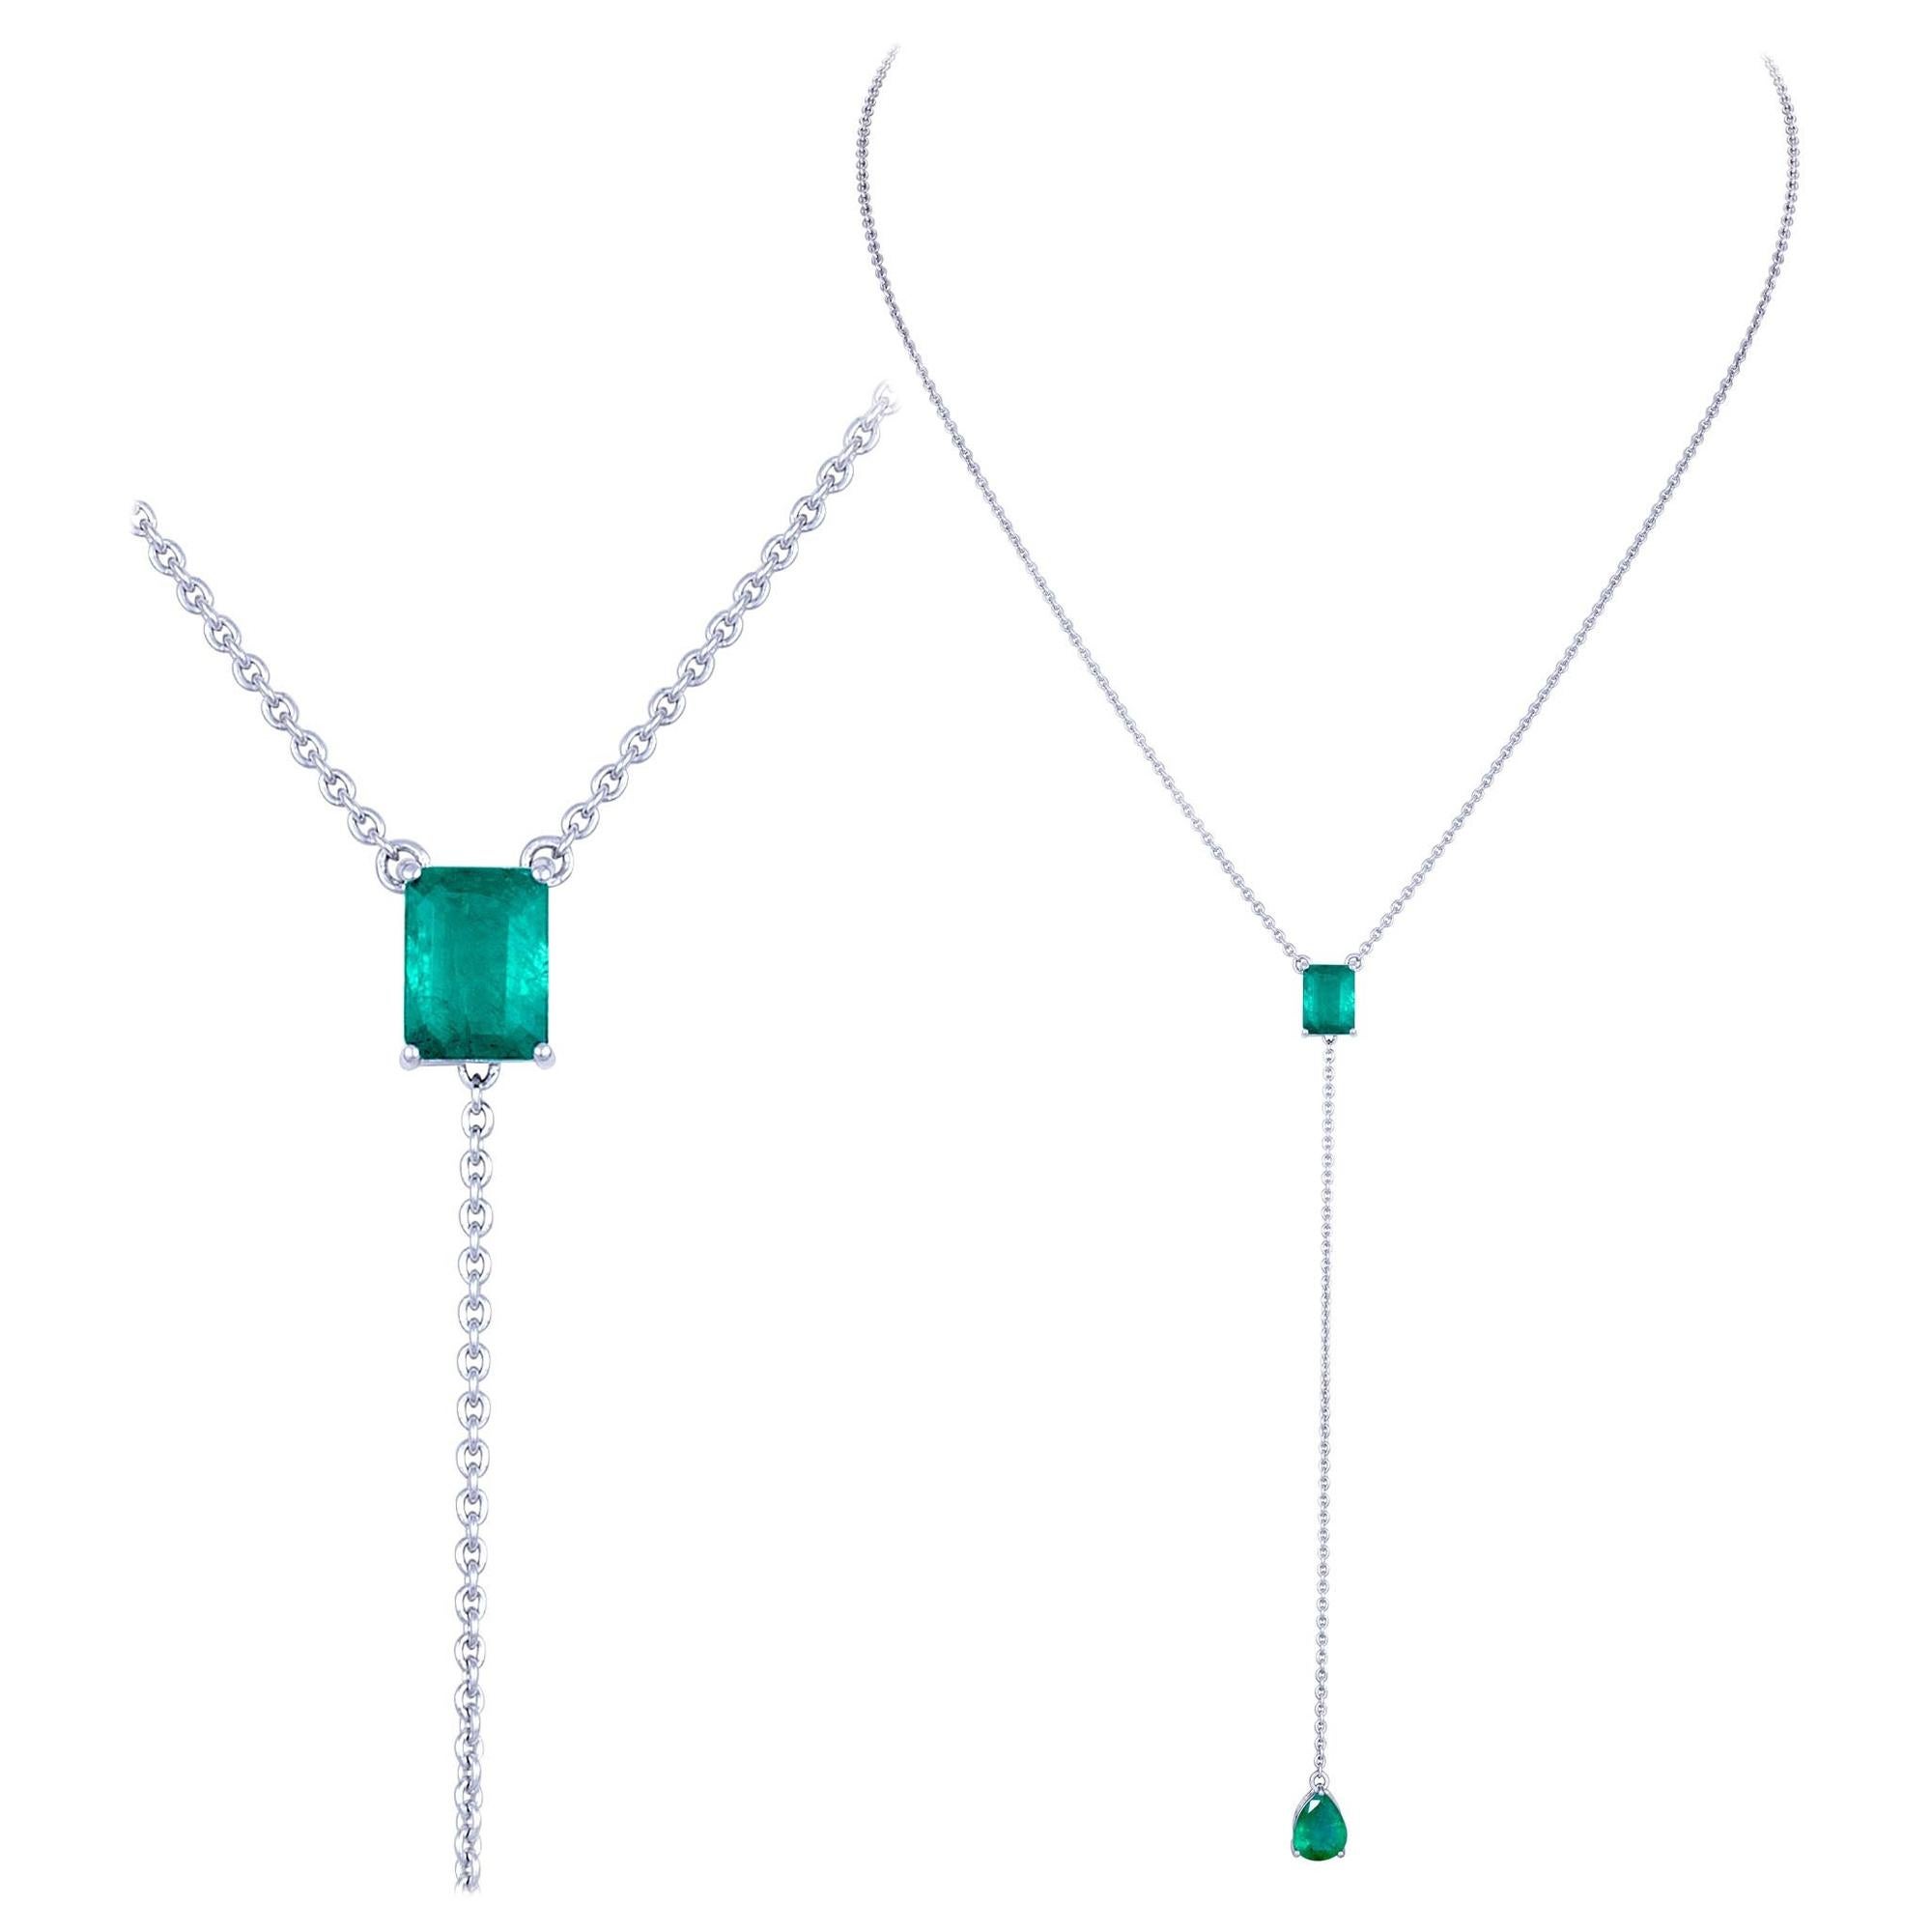 Breathtaking Emerald Diamond 18K White Gold Necklace for Her